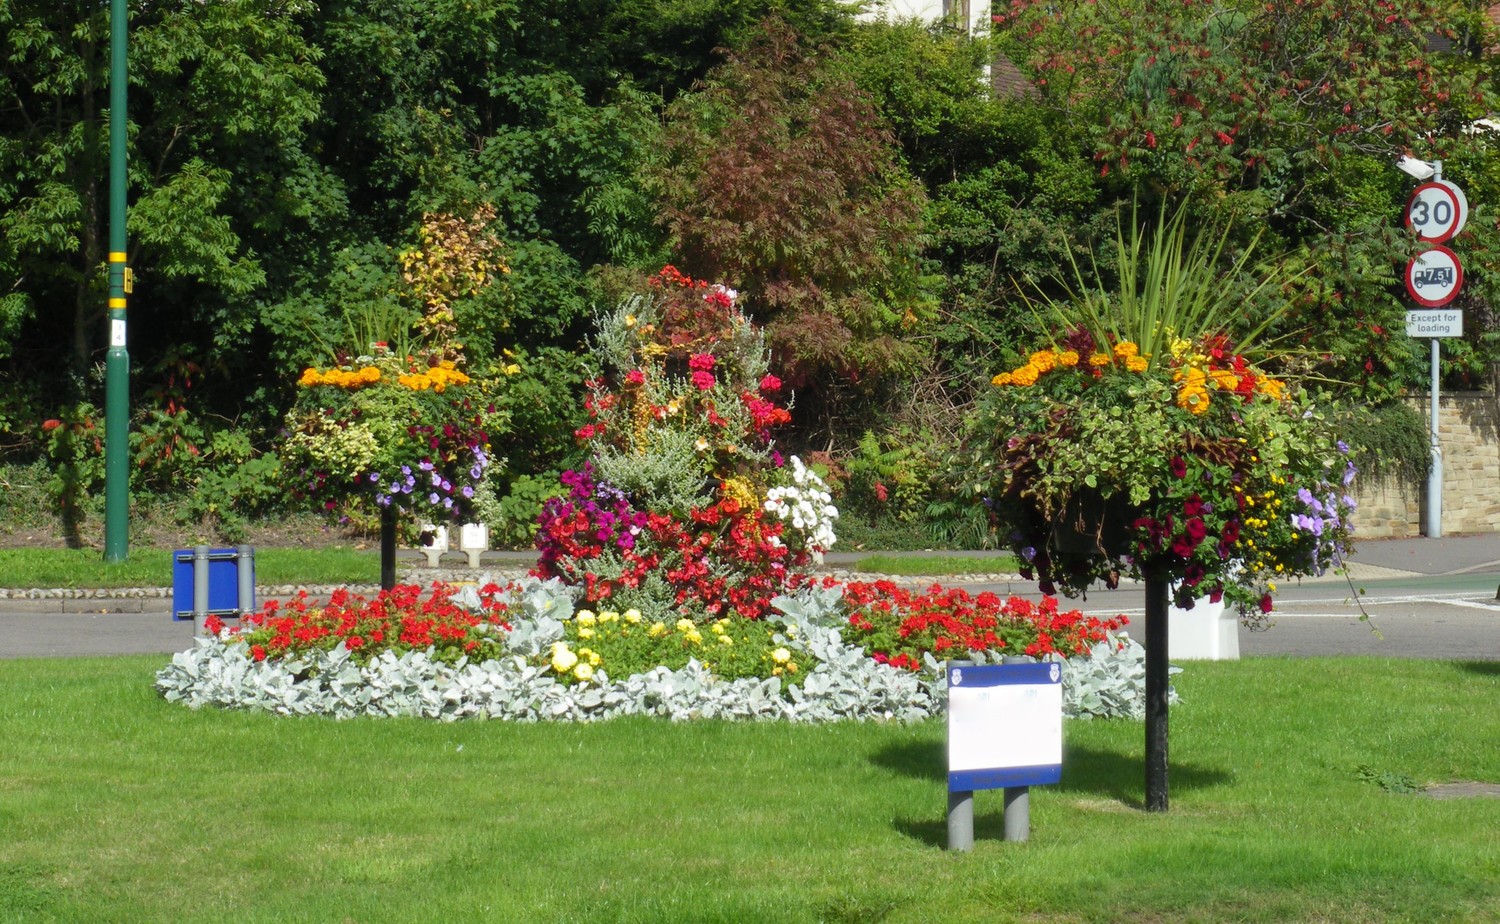 Photo of a roundabout with floral features